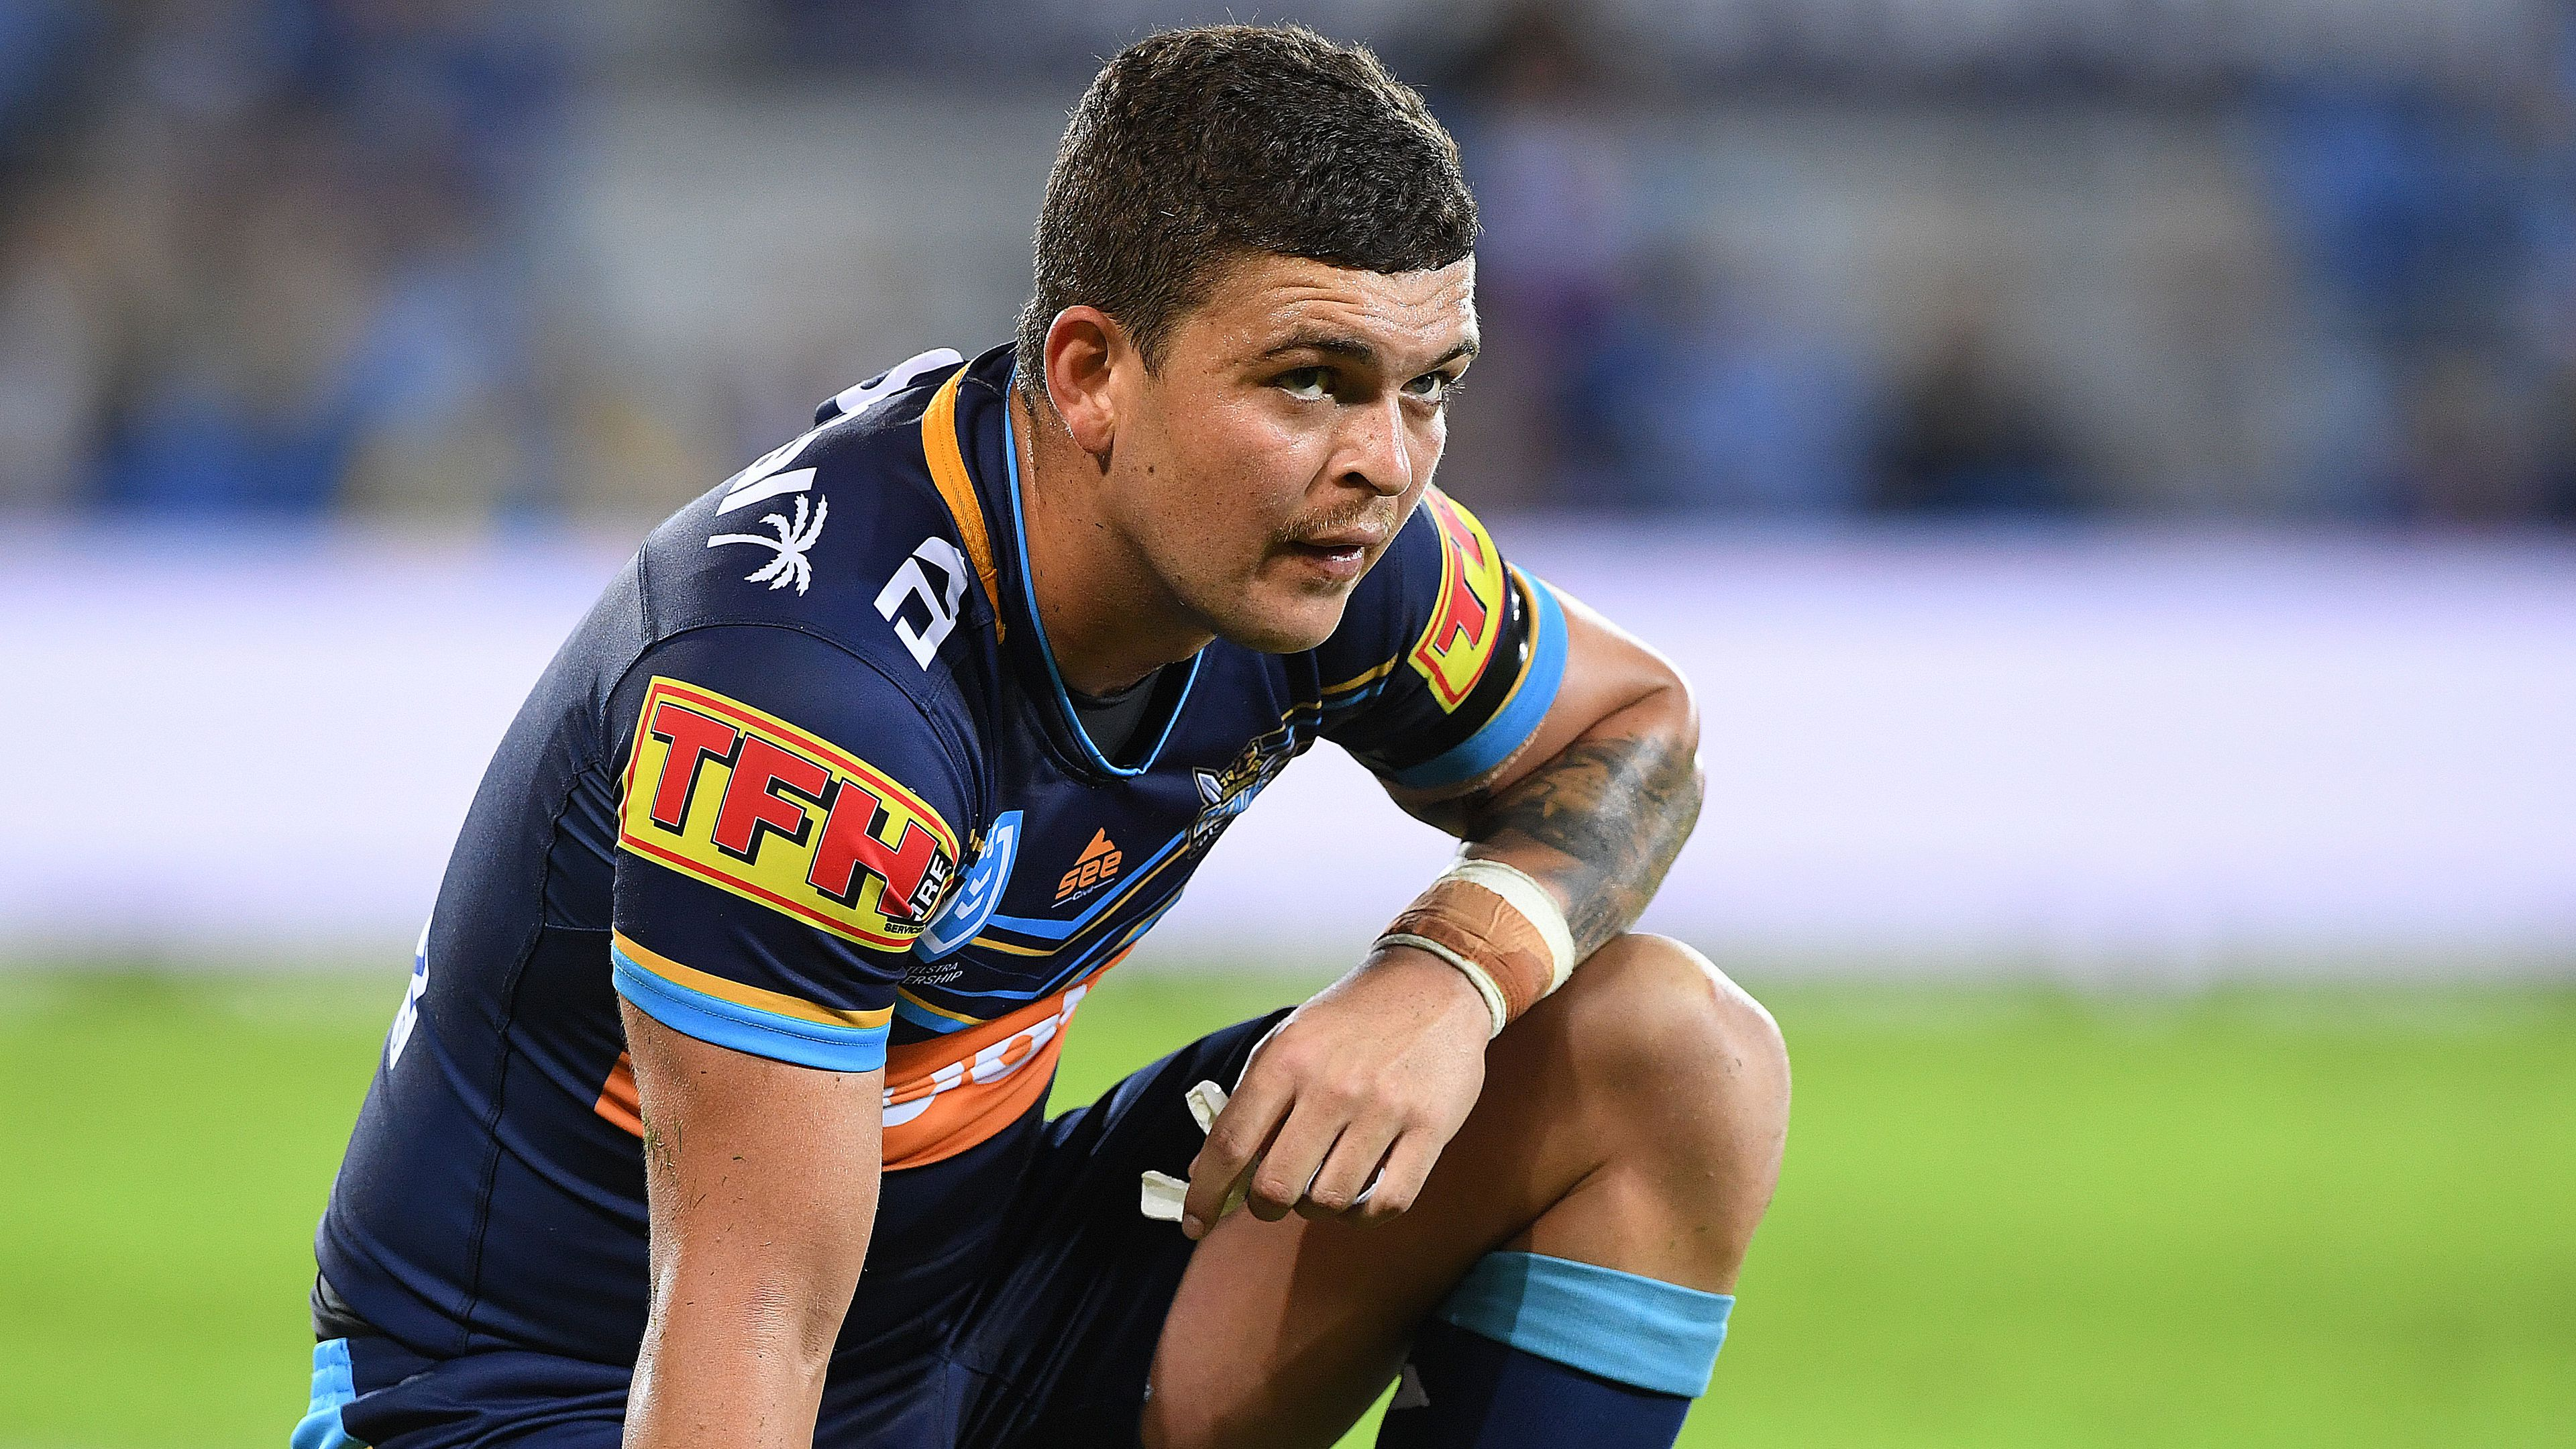 ‘Weight off my shoulders’: Taylor chasing NRL revival after ditching $1m burden